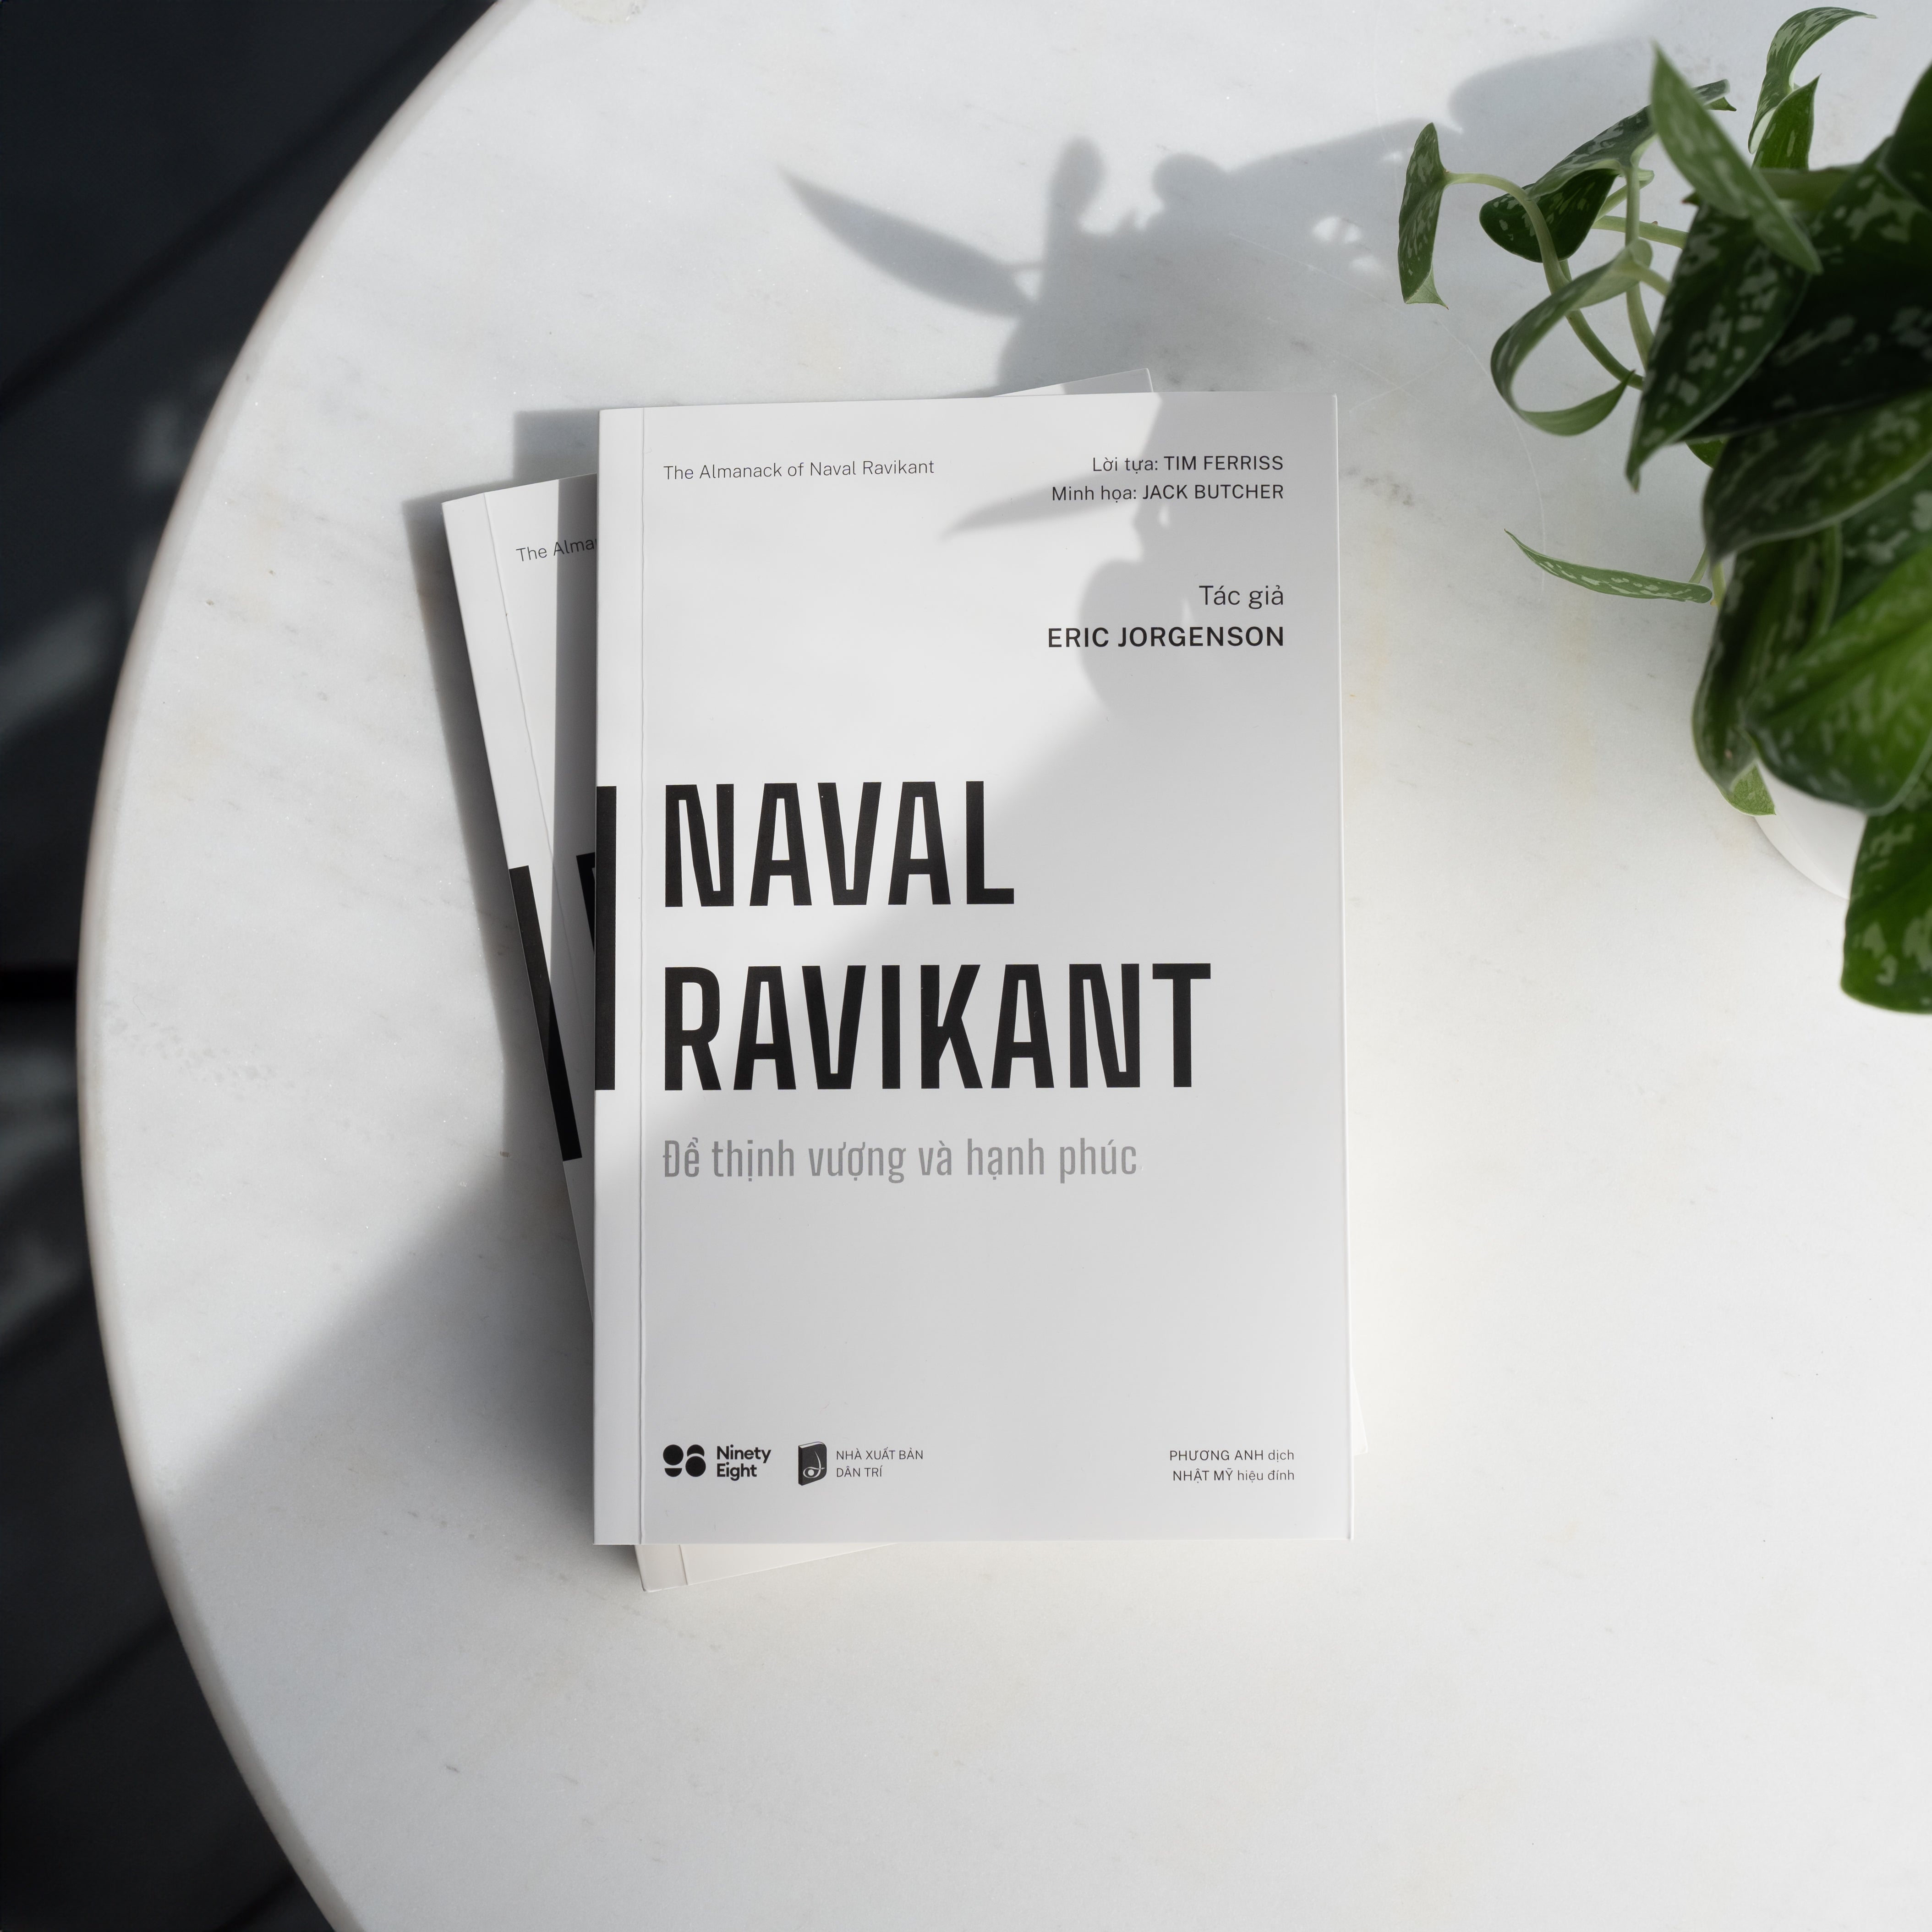 THE ALMANACK OF NAVAL RAVIKANT: A GUIDE TO WEALTH AND HAPPINESS